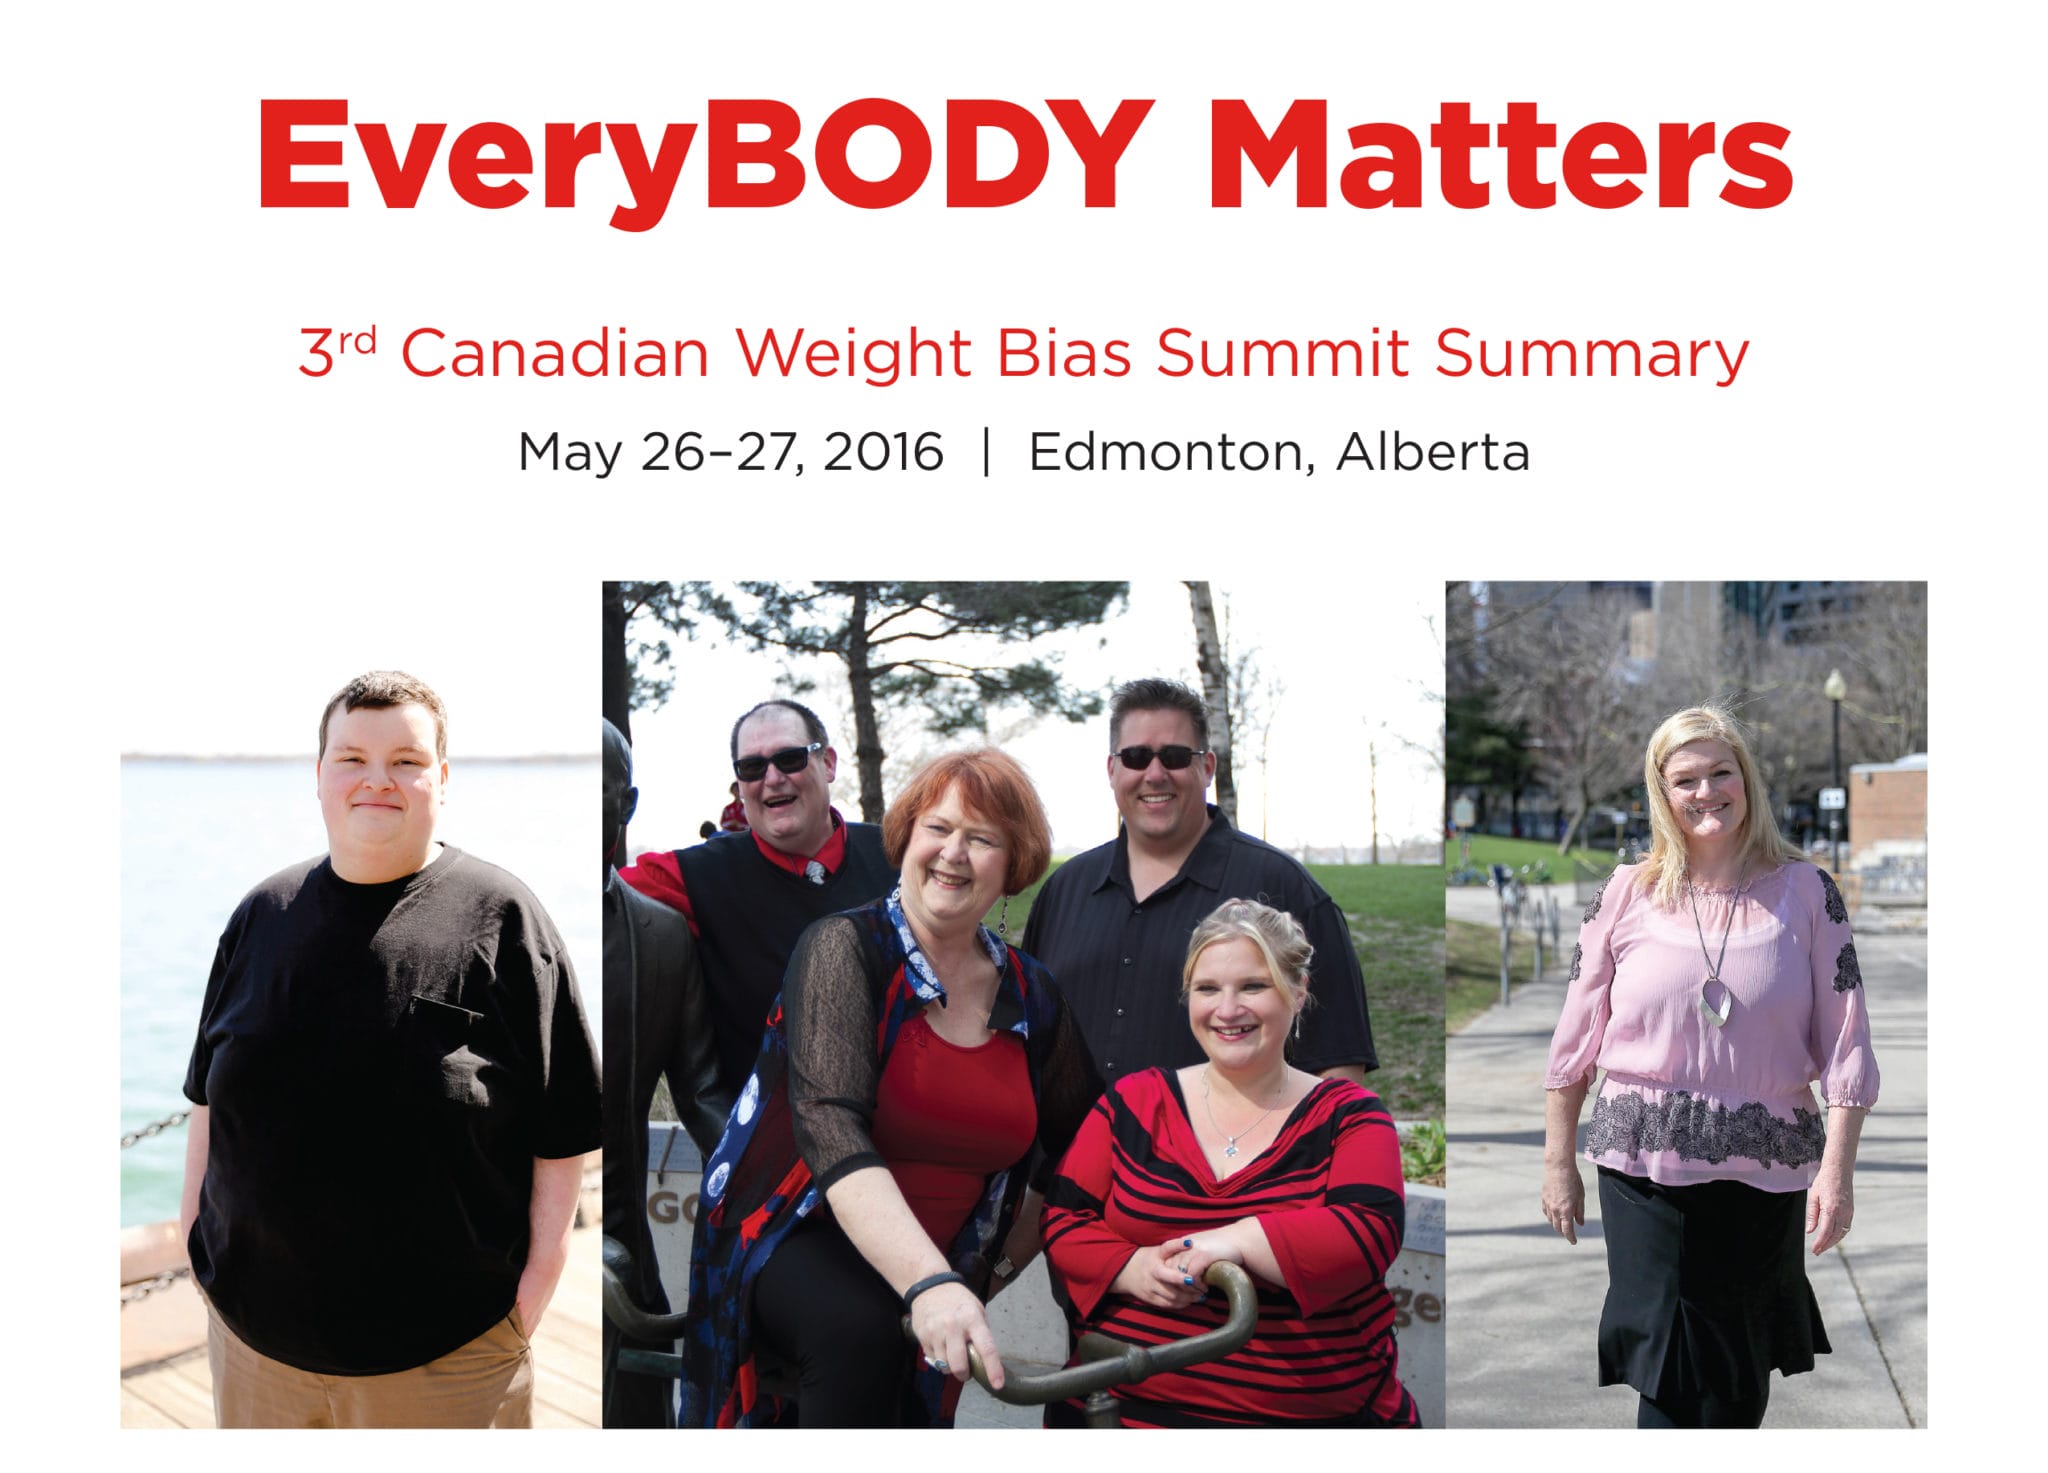 Promotional poster for the 3rd canadian weight bias summit, featuring the text "everybody matters" and portraits of five smiling adults, held in edmonton, alberta on may 26-27, 2016.